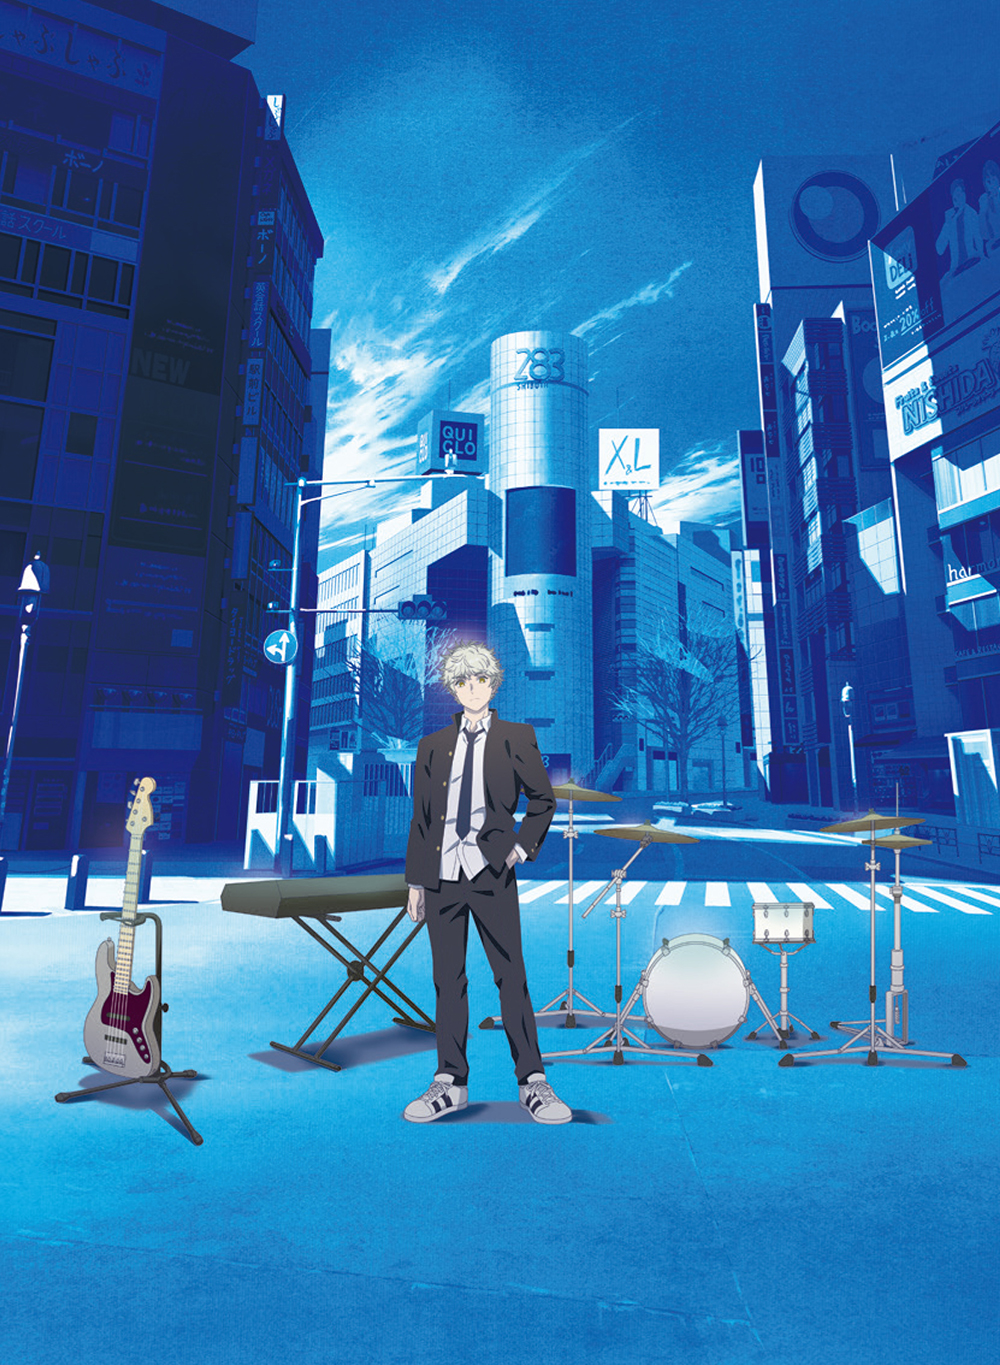 Omoinotake、メジャーデビューEP『EVERBLUE』本日発売！ 今夜22時よりトークライブを生配信 - 画像一覧（2/3）